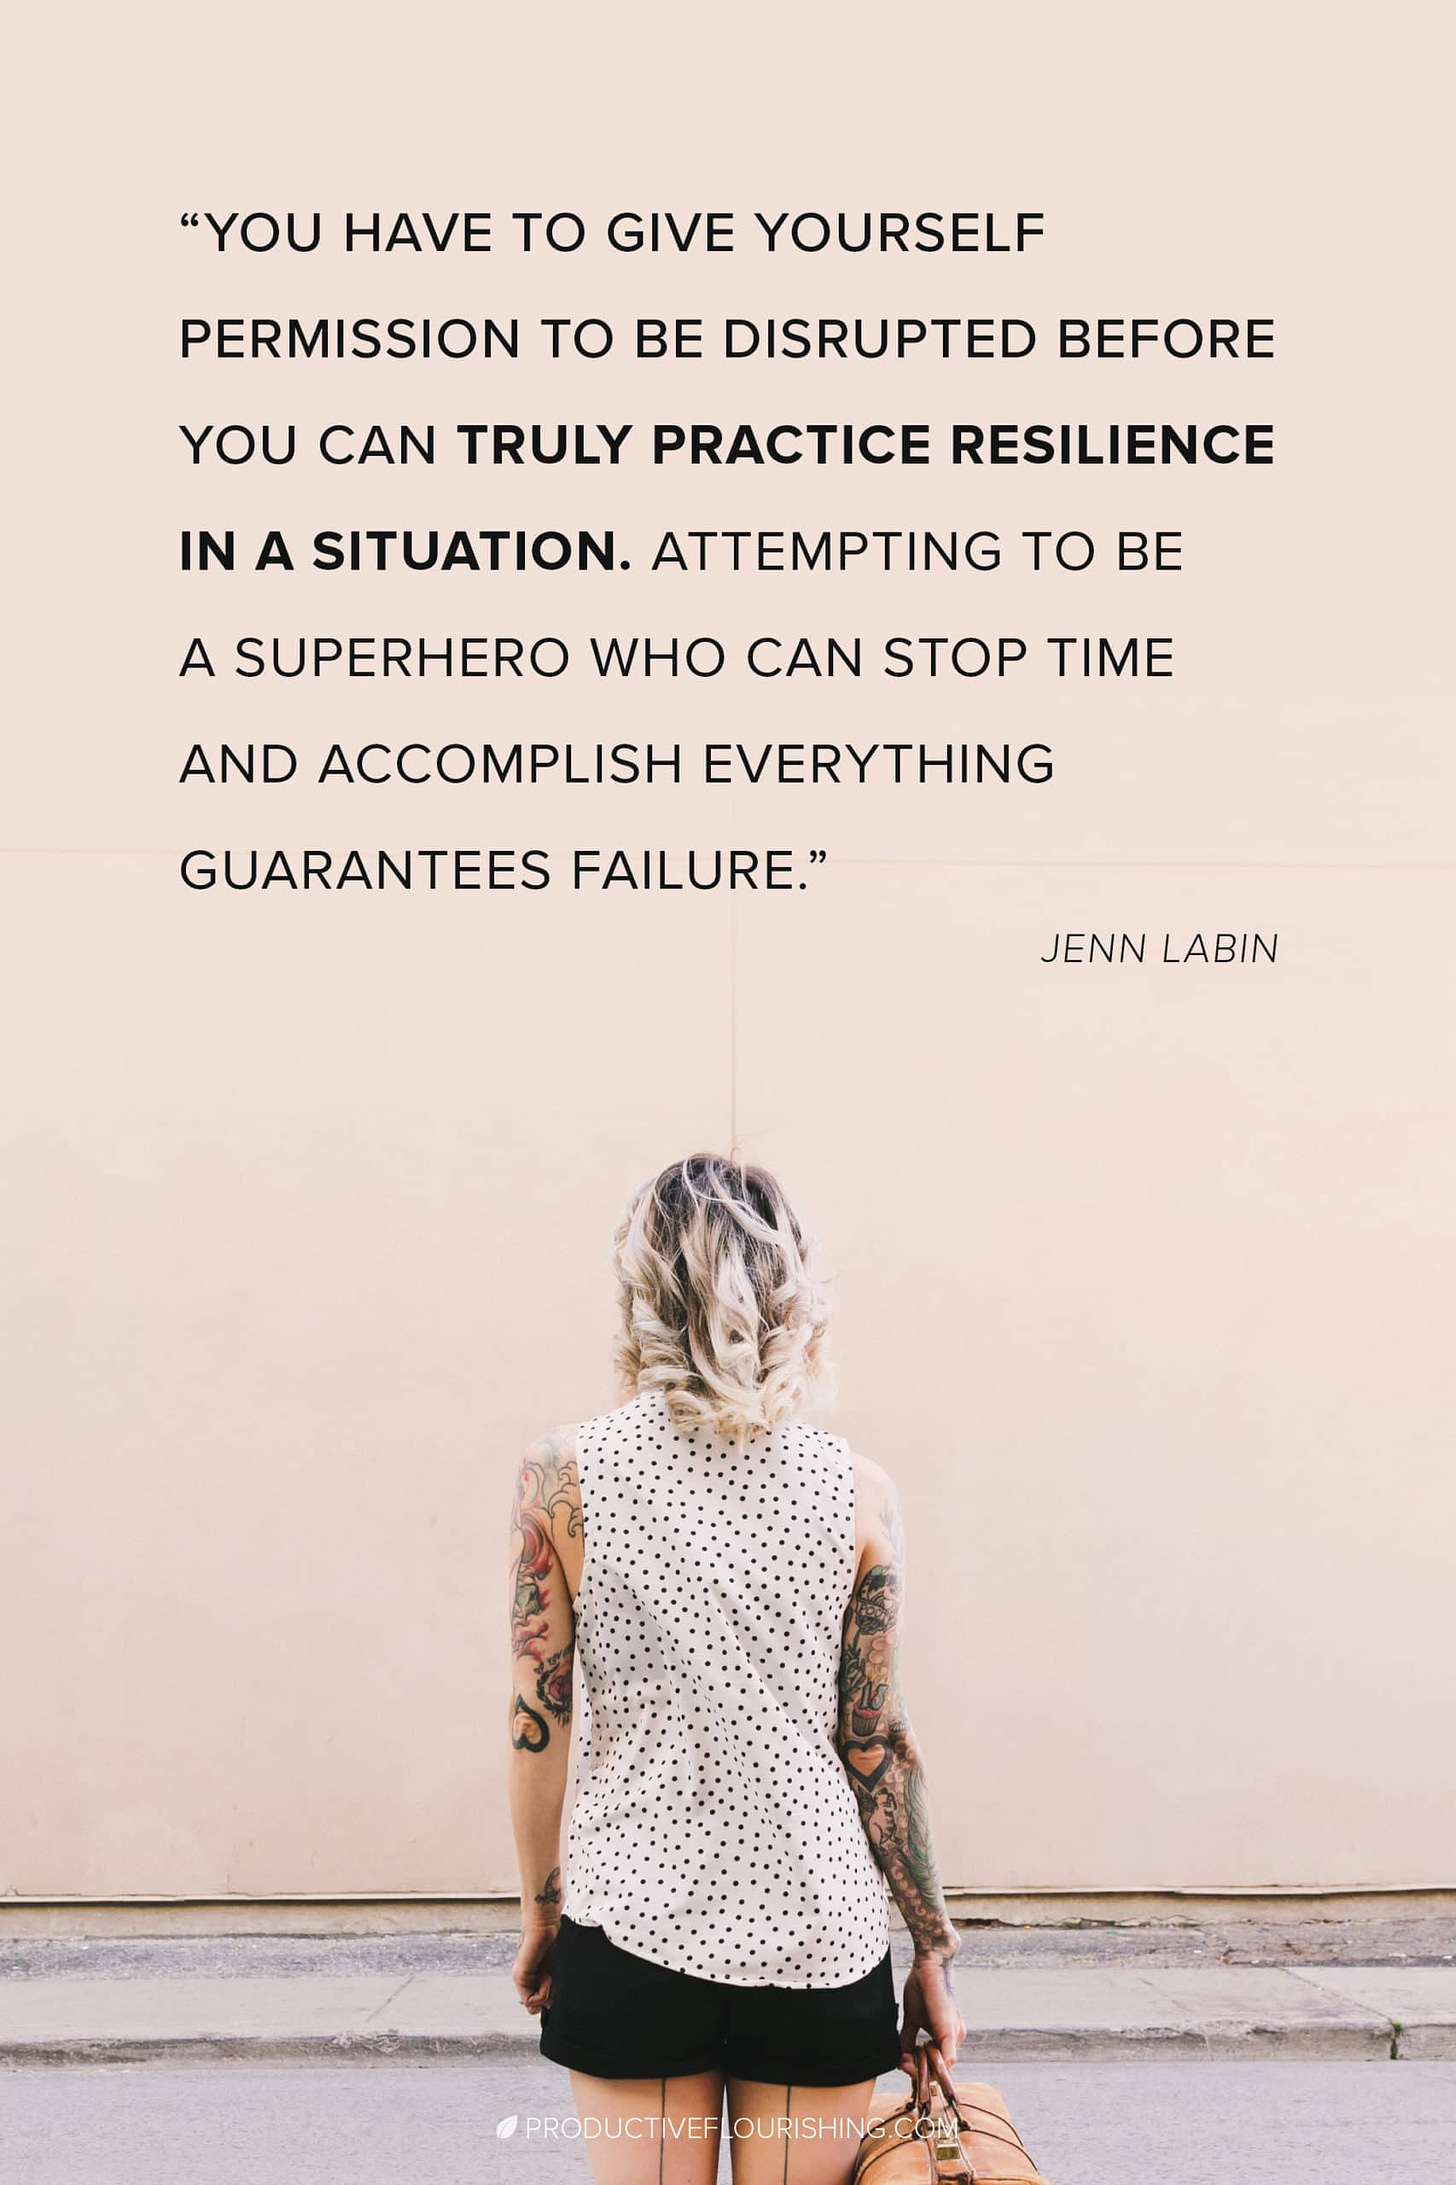 Overcoming Major Disruptions In Your Work Life: How to be more present at work when personal events wreak havoc on productivity at work. Guest author, Jenn Labin, highlights three steps to practicing resilience - the key to bouncing back to productivity. Be intentional about the comeback! #skillsforsuccess #resilientmindset #productiveflourishing